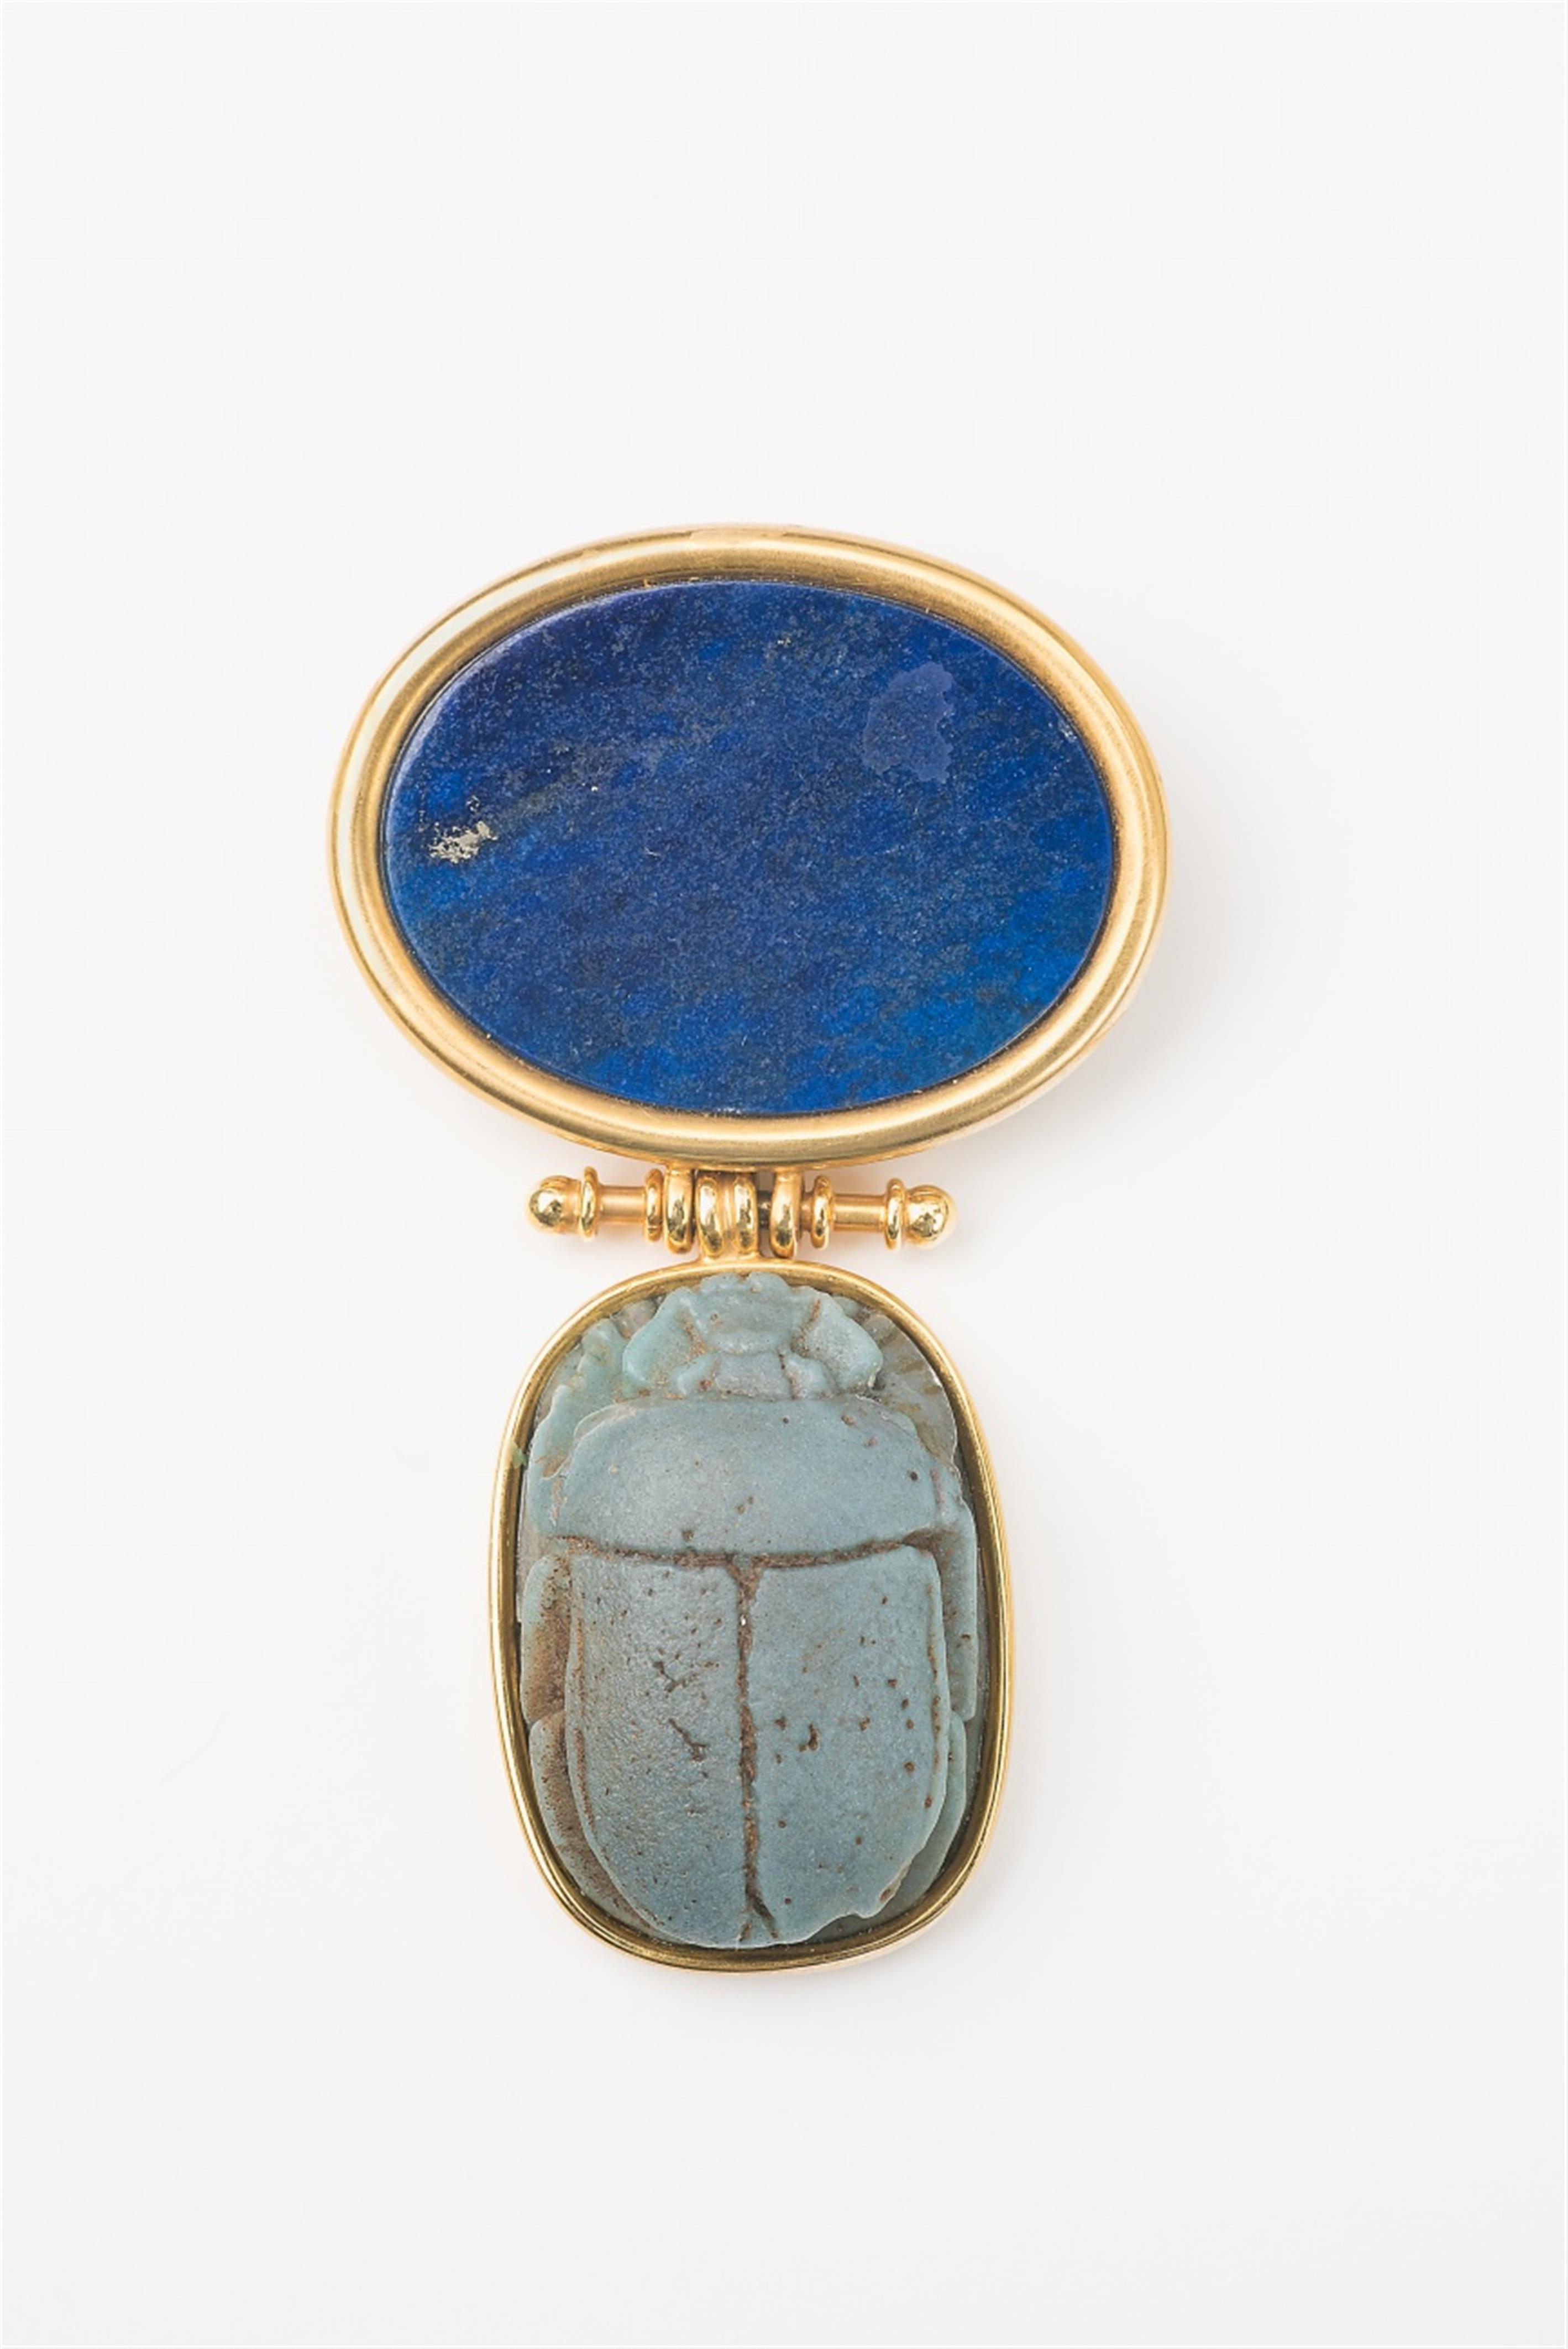 An 18k gold brooch with an Ancient Egyptian scarab amulet - image-1